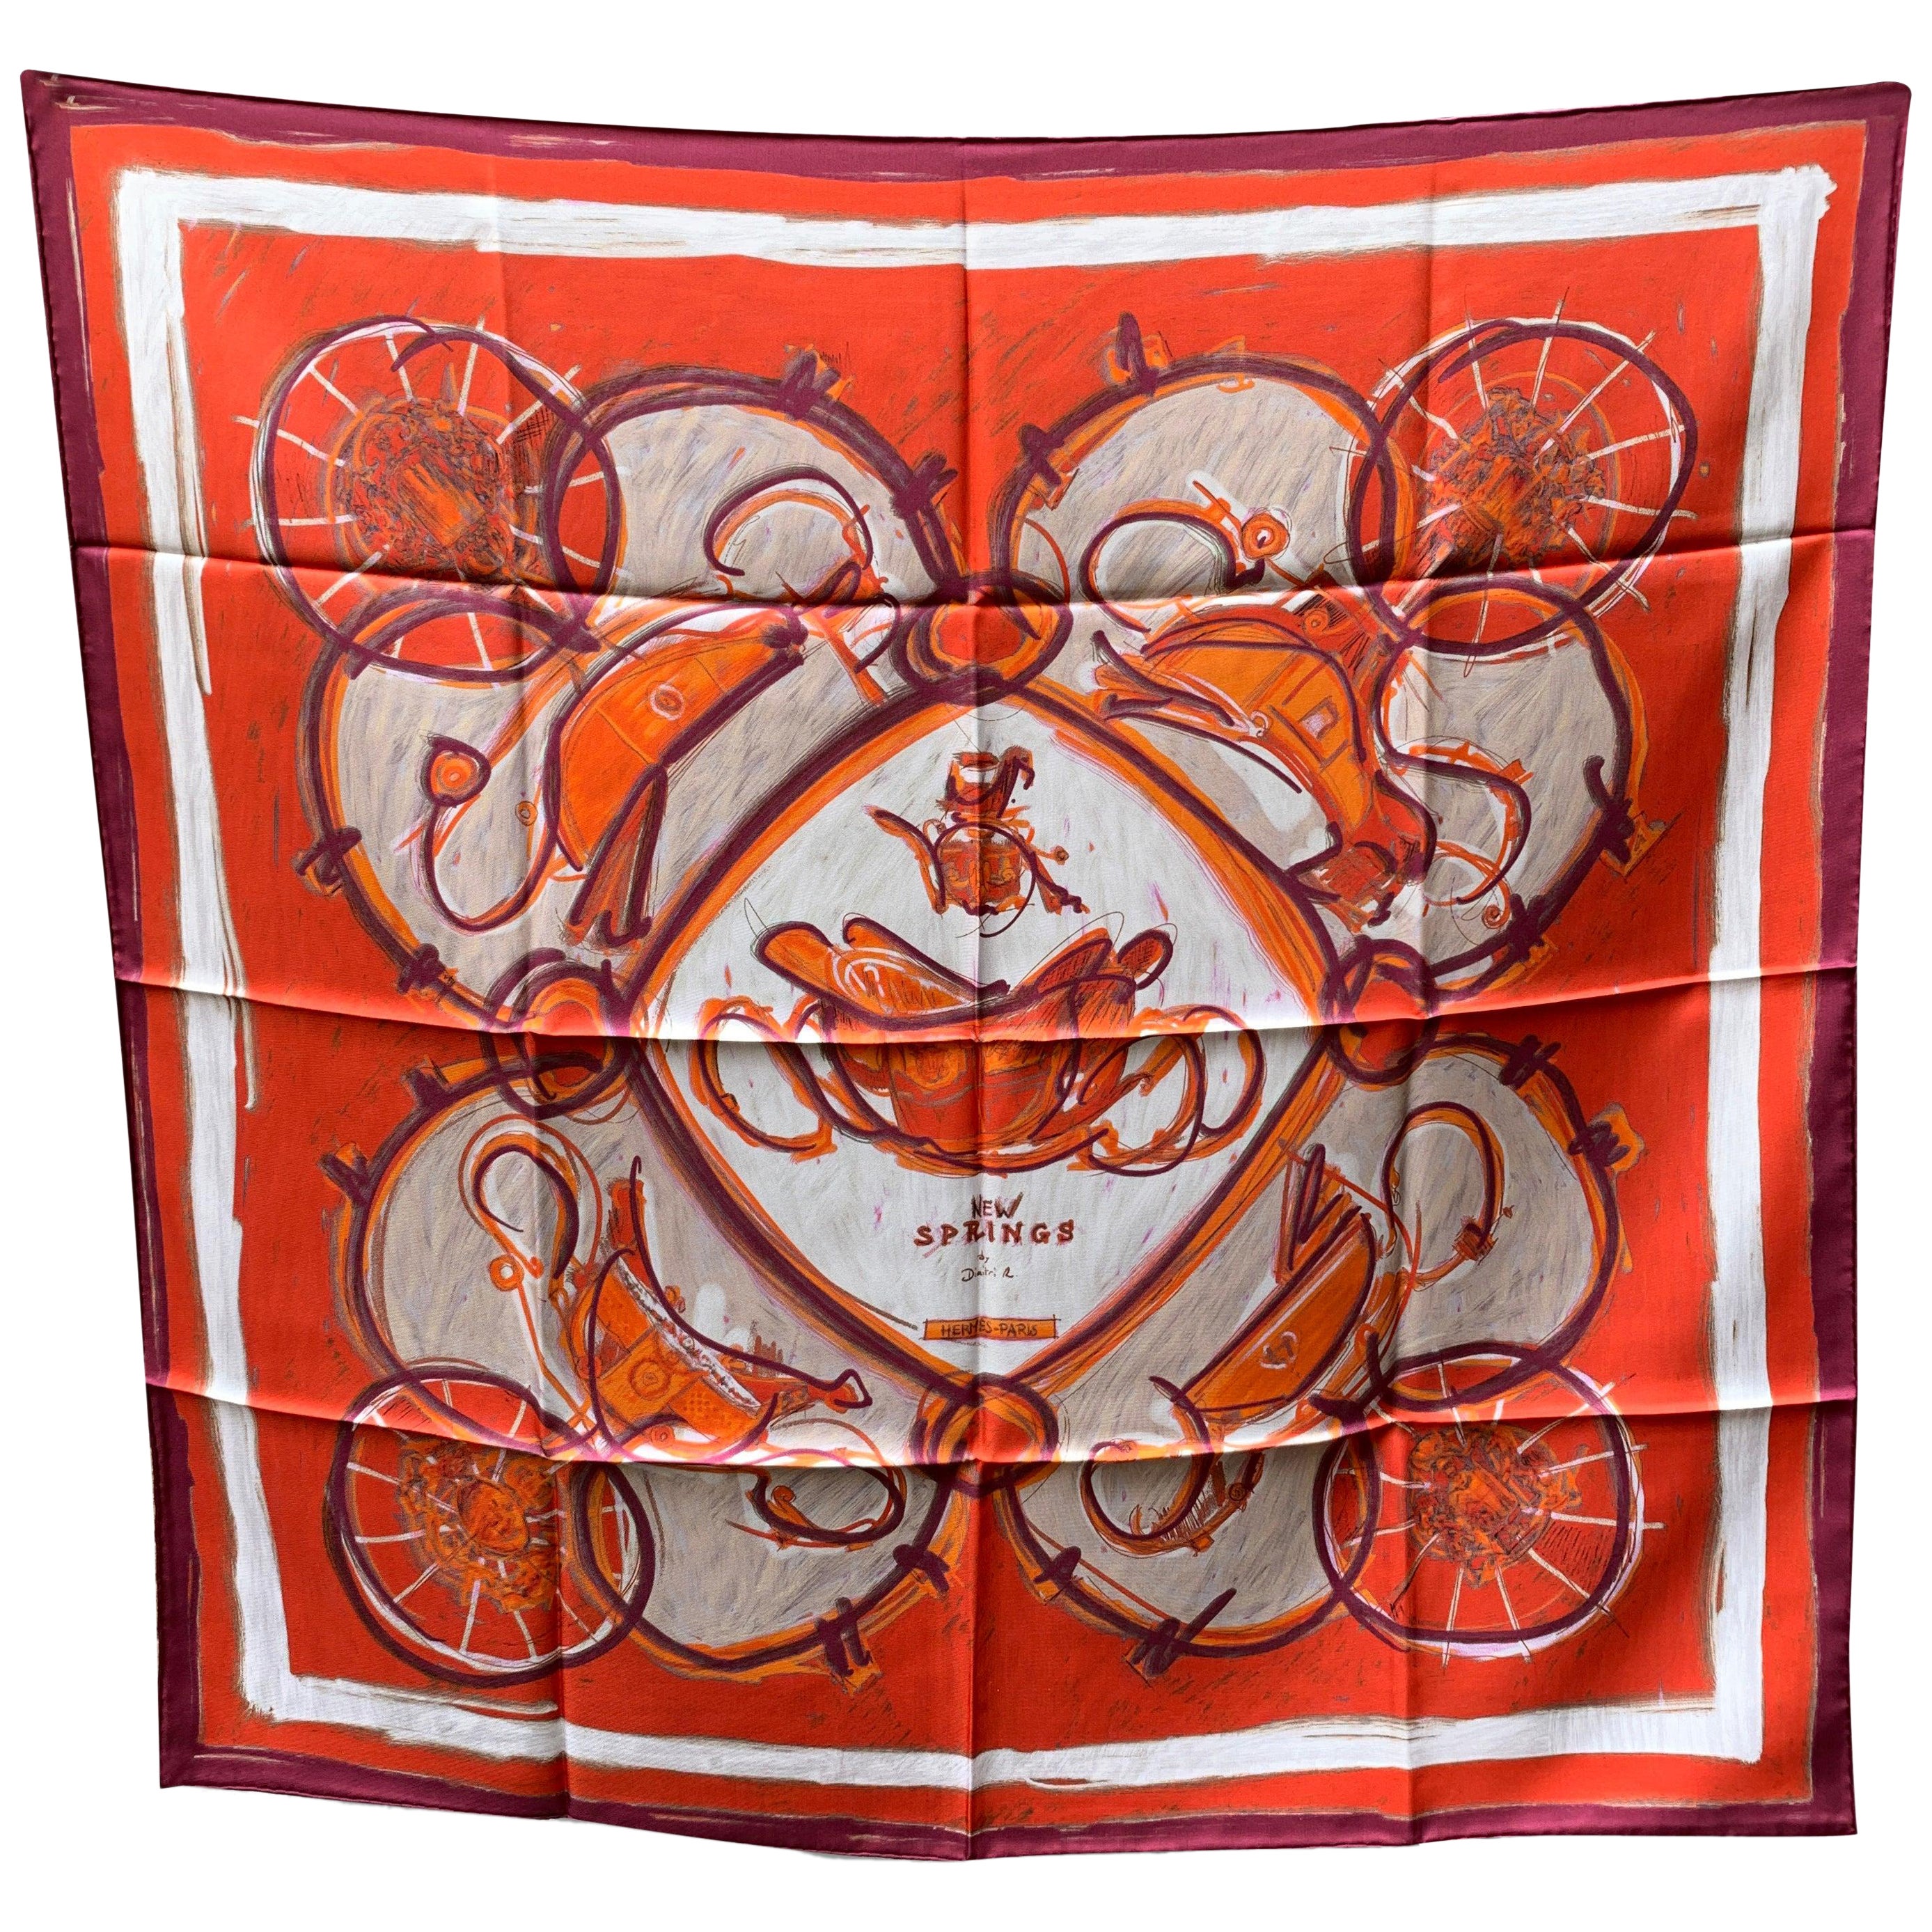 Hermes Paris Red Silk Scarf New Springs 2009 Rybaltchenko For Sale